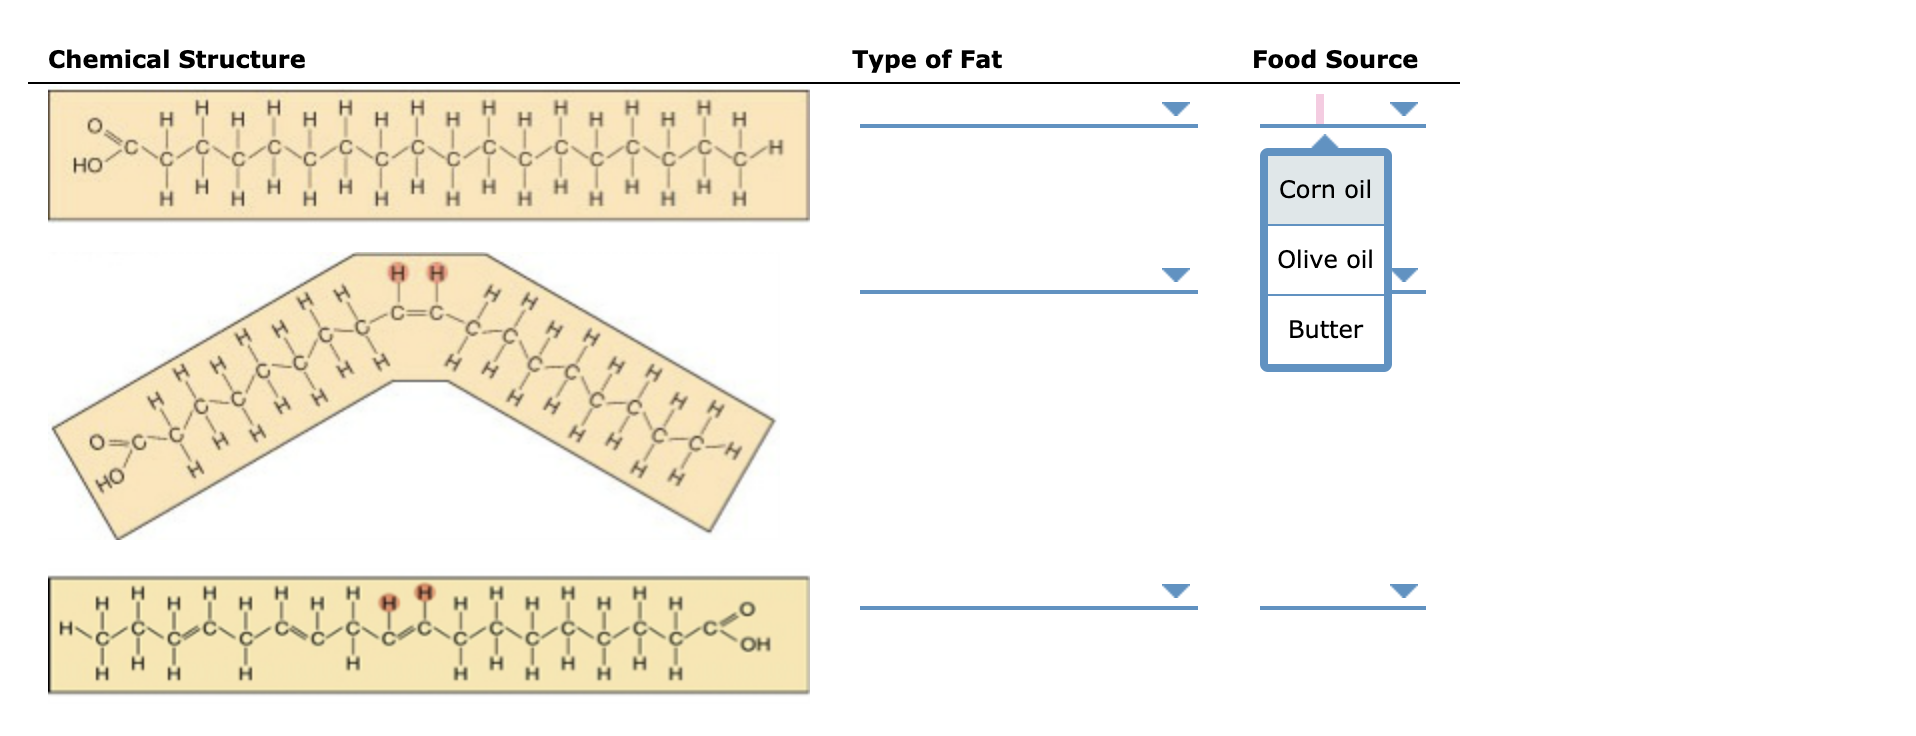 chemical structure of fats